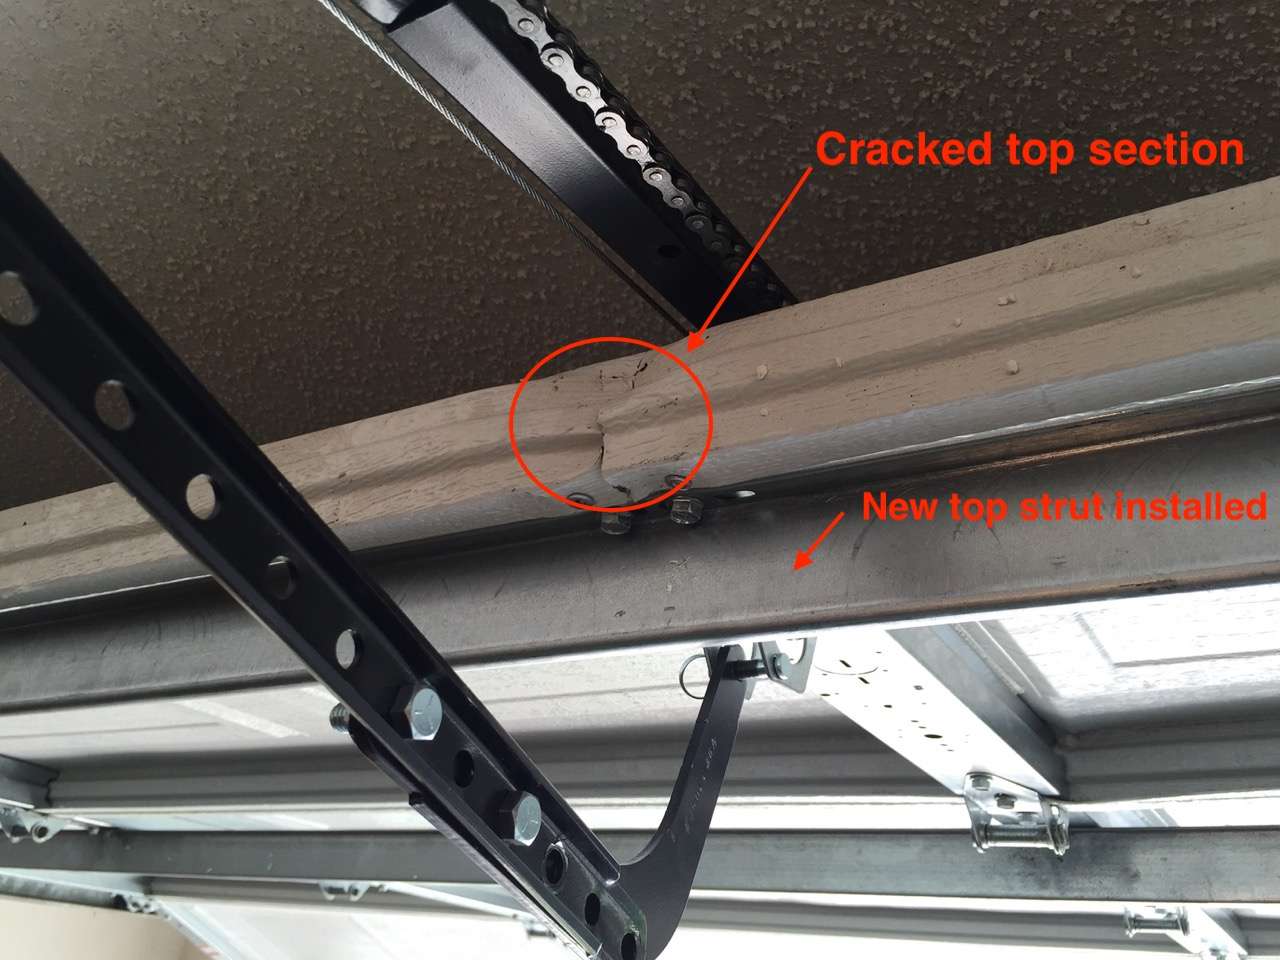 The top section had a crack in it causing it to bend and sag. A reinforcement strut was installed and now the section is straight.